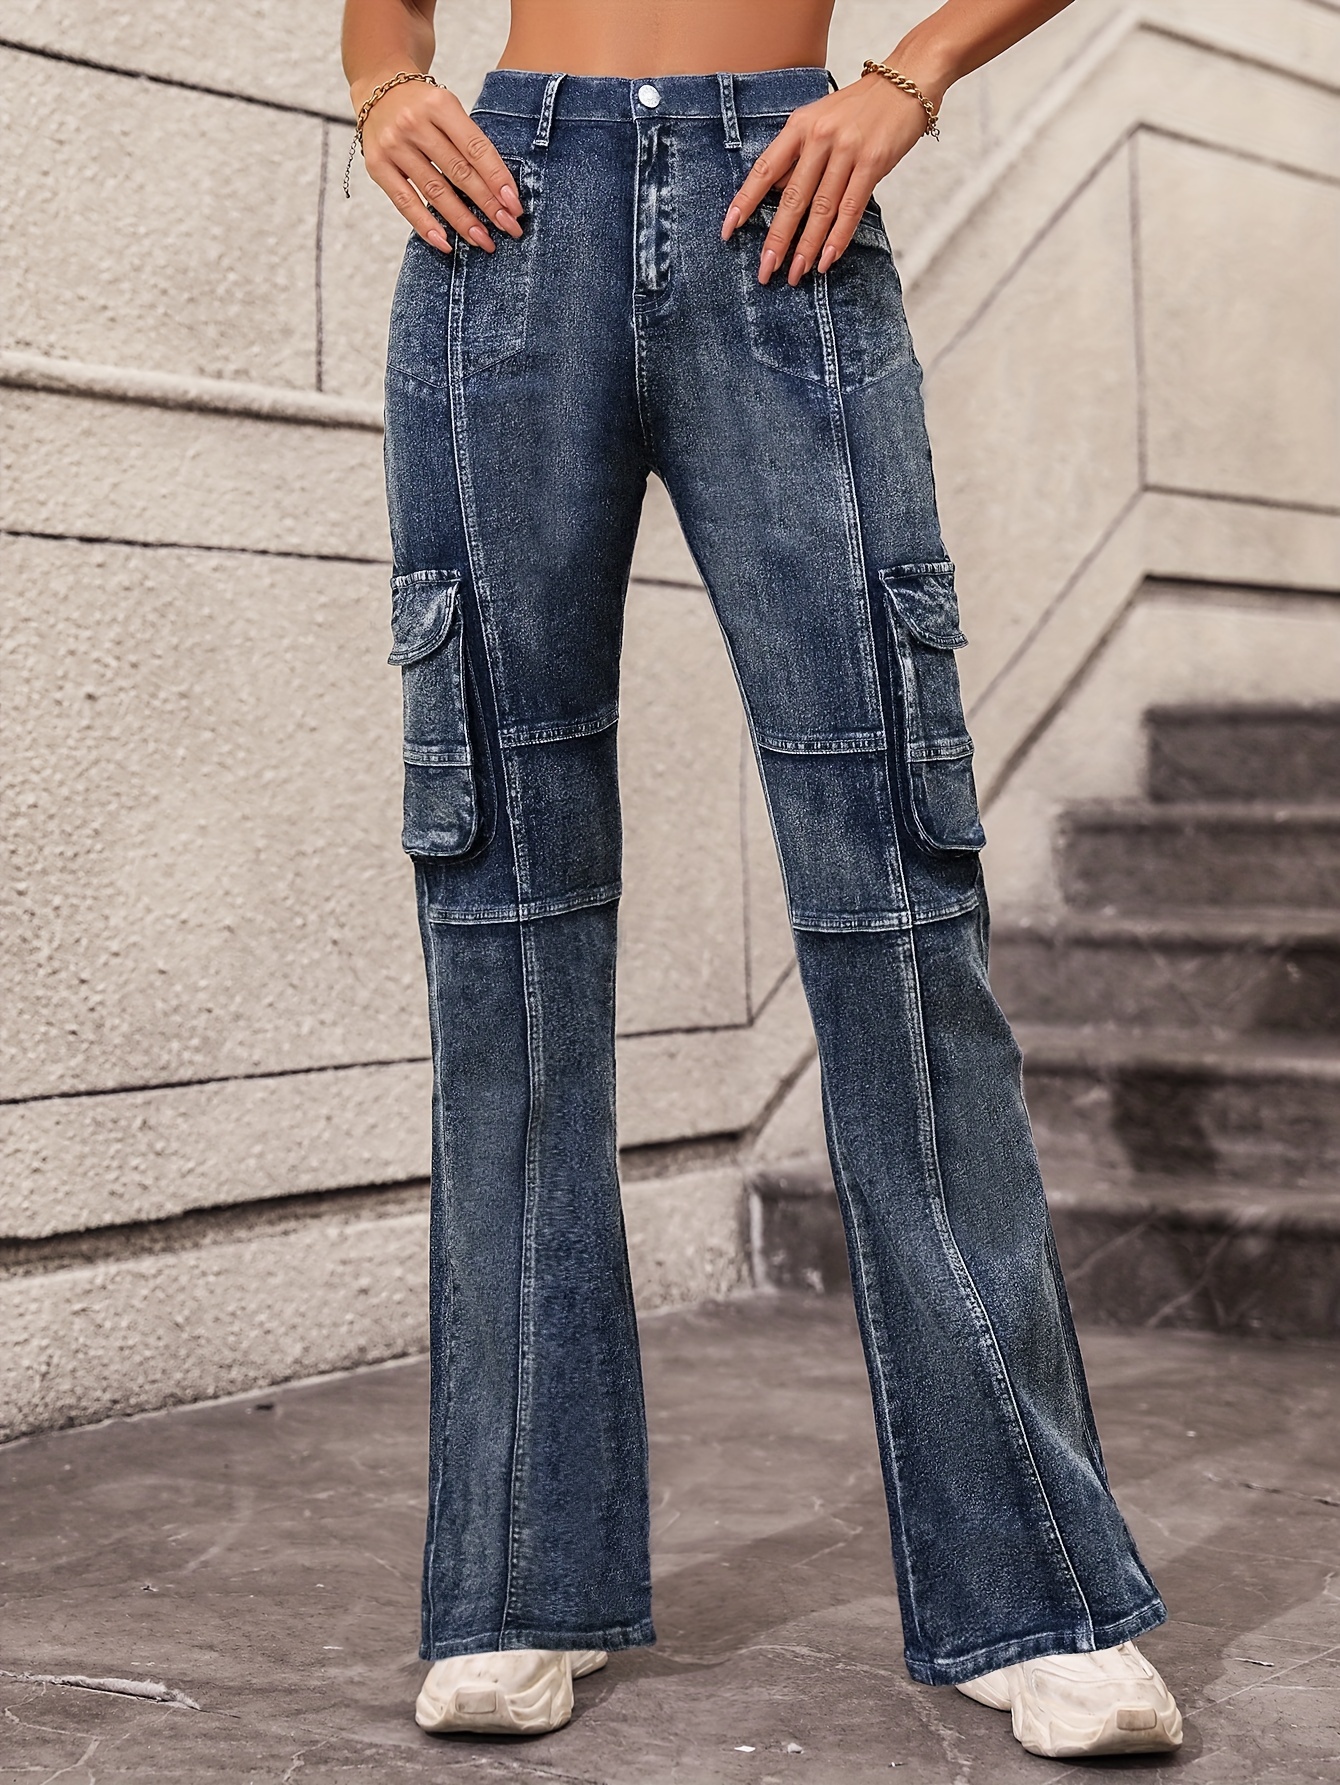 Blue Flap Pockets Cargo Pants, High Waist High-Stretch Y2K Style Pintuck  Jeans, Women's Denim Jeans & Clothing